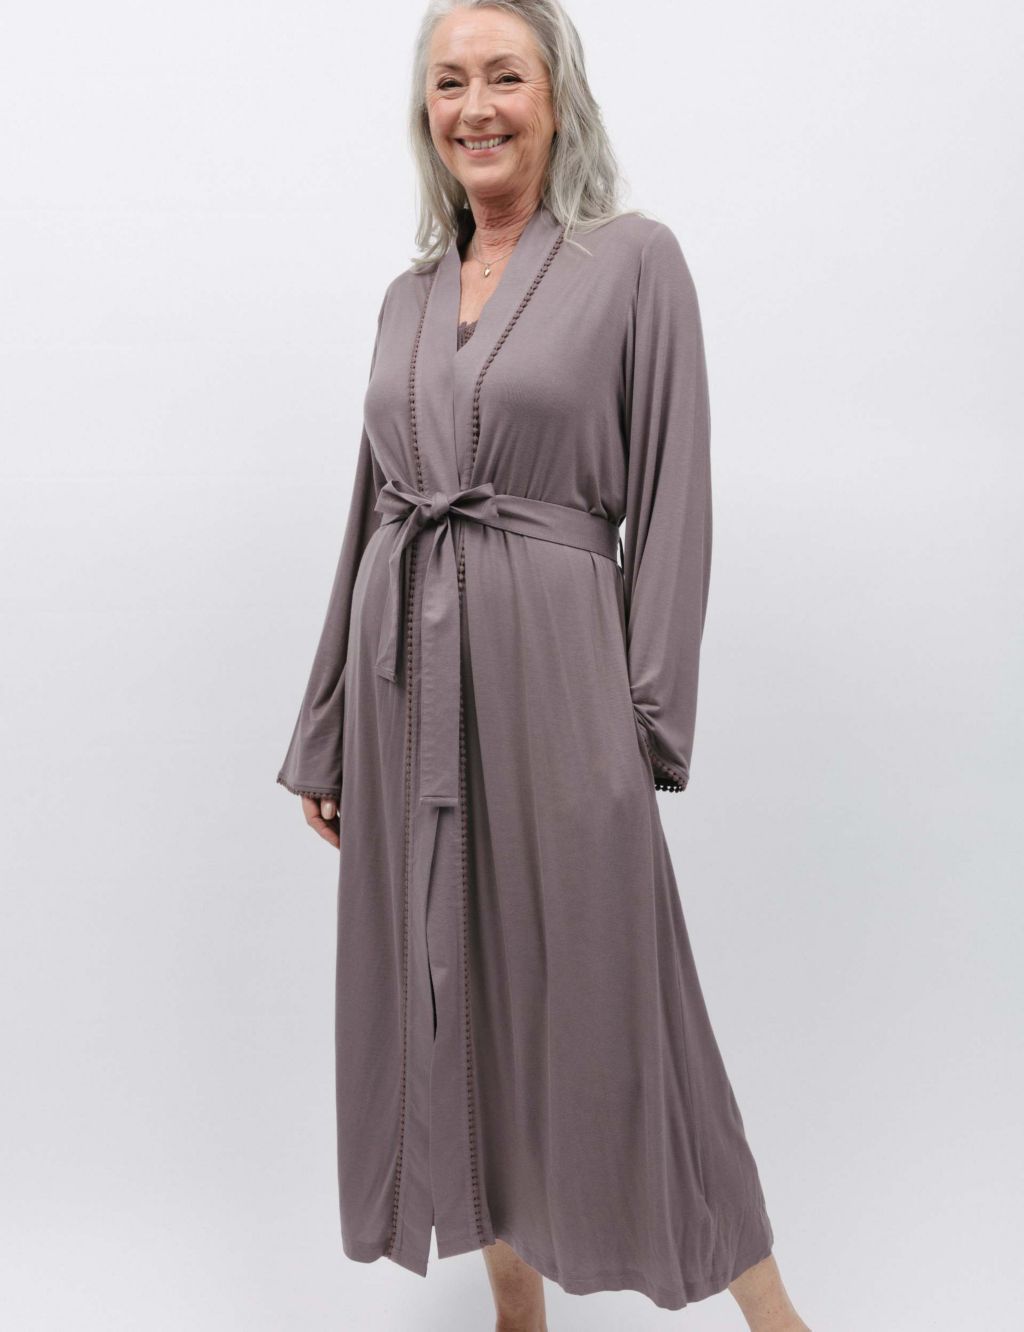 Lace Trim Dressing Gown image 1